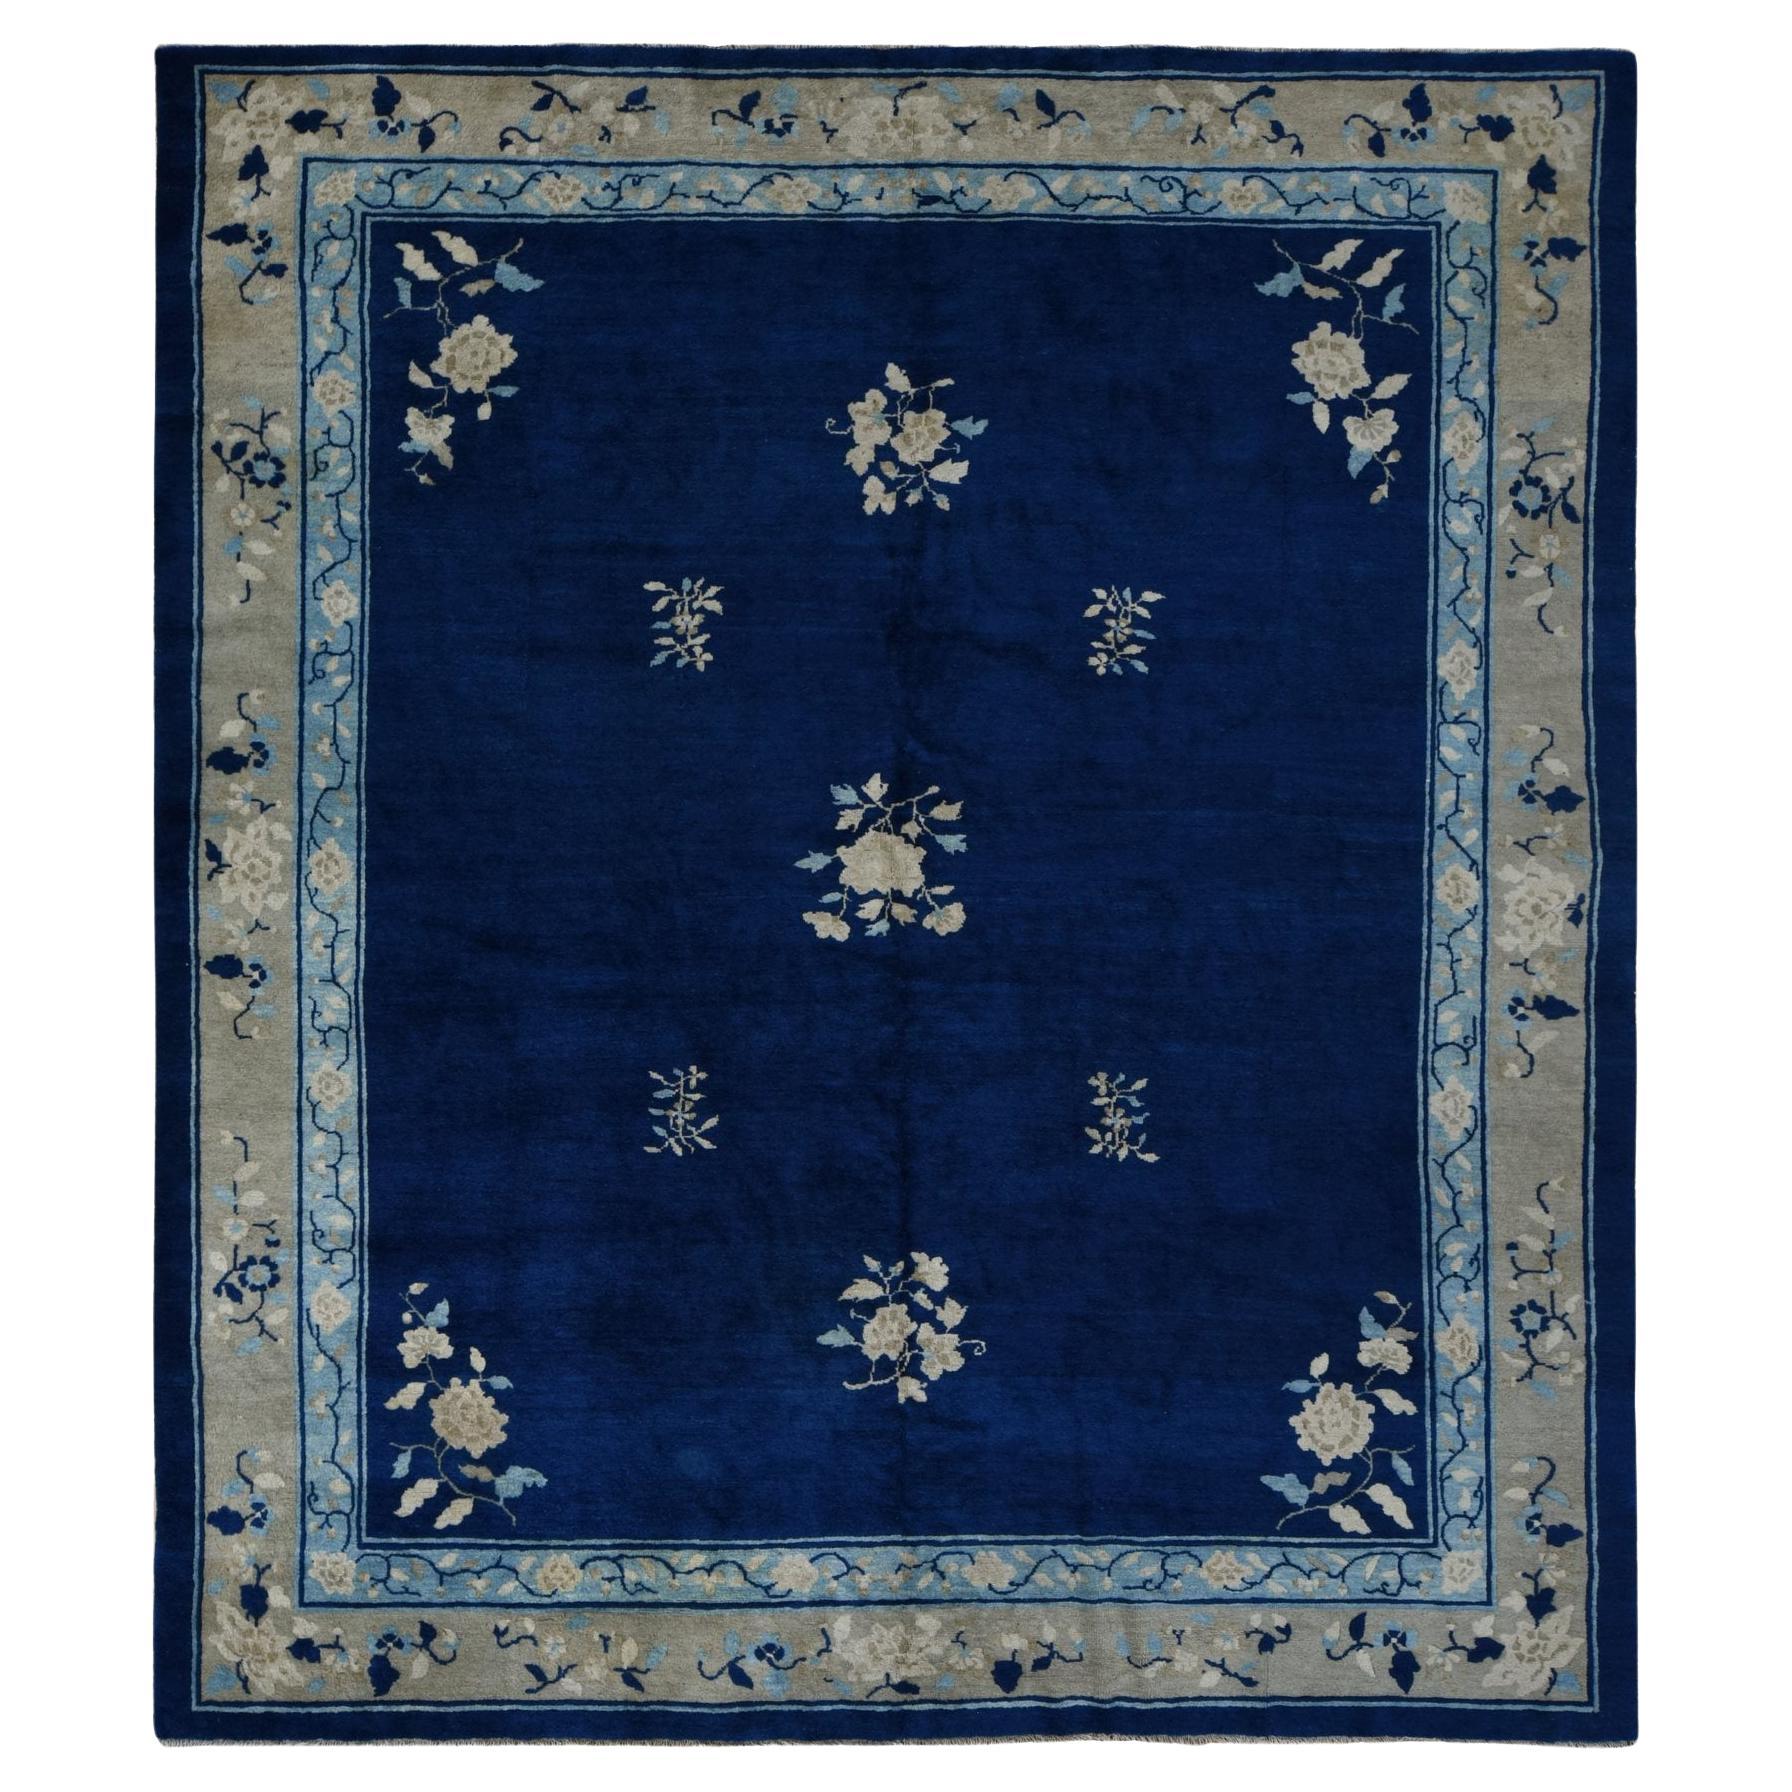 Blue Antique Chinese Peking Clean and Soft Hand Knotted Oriental Rug (8'x9'4")